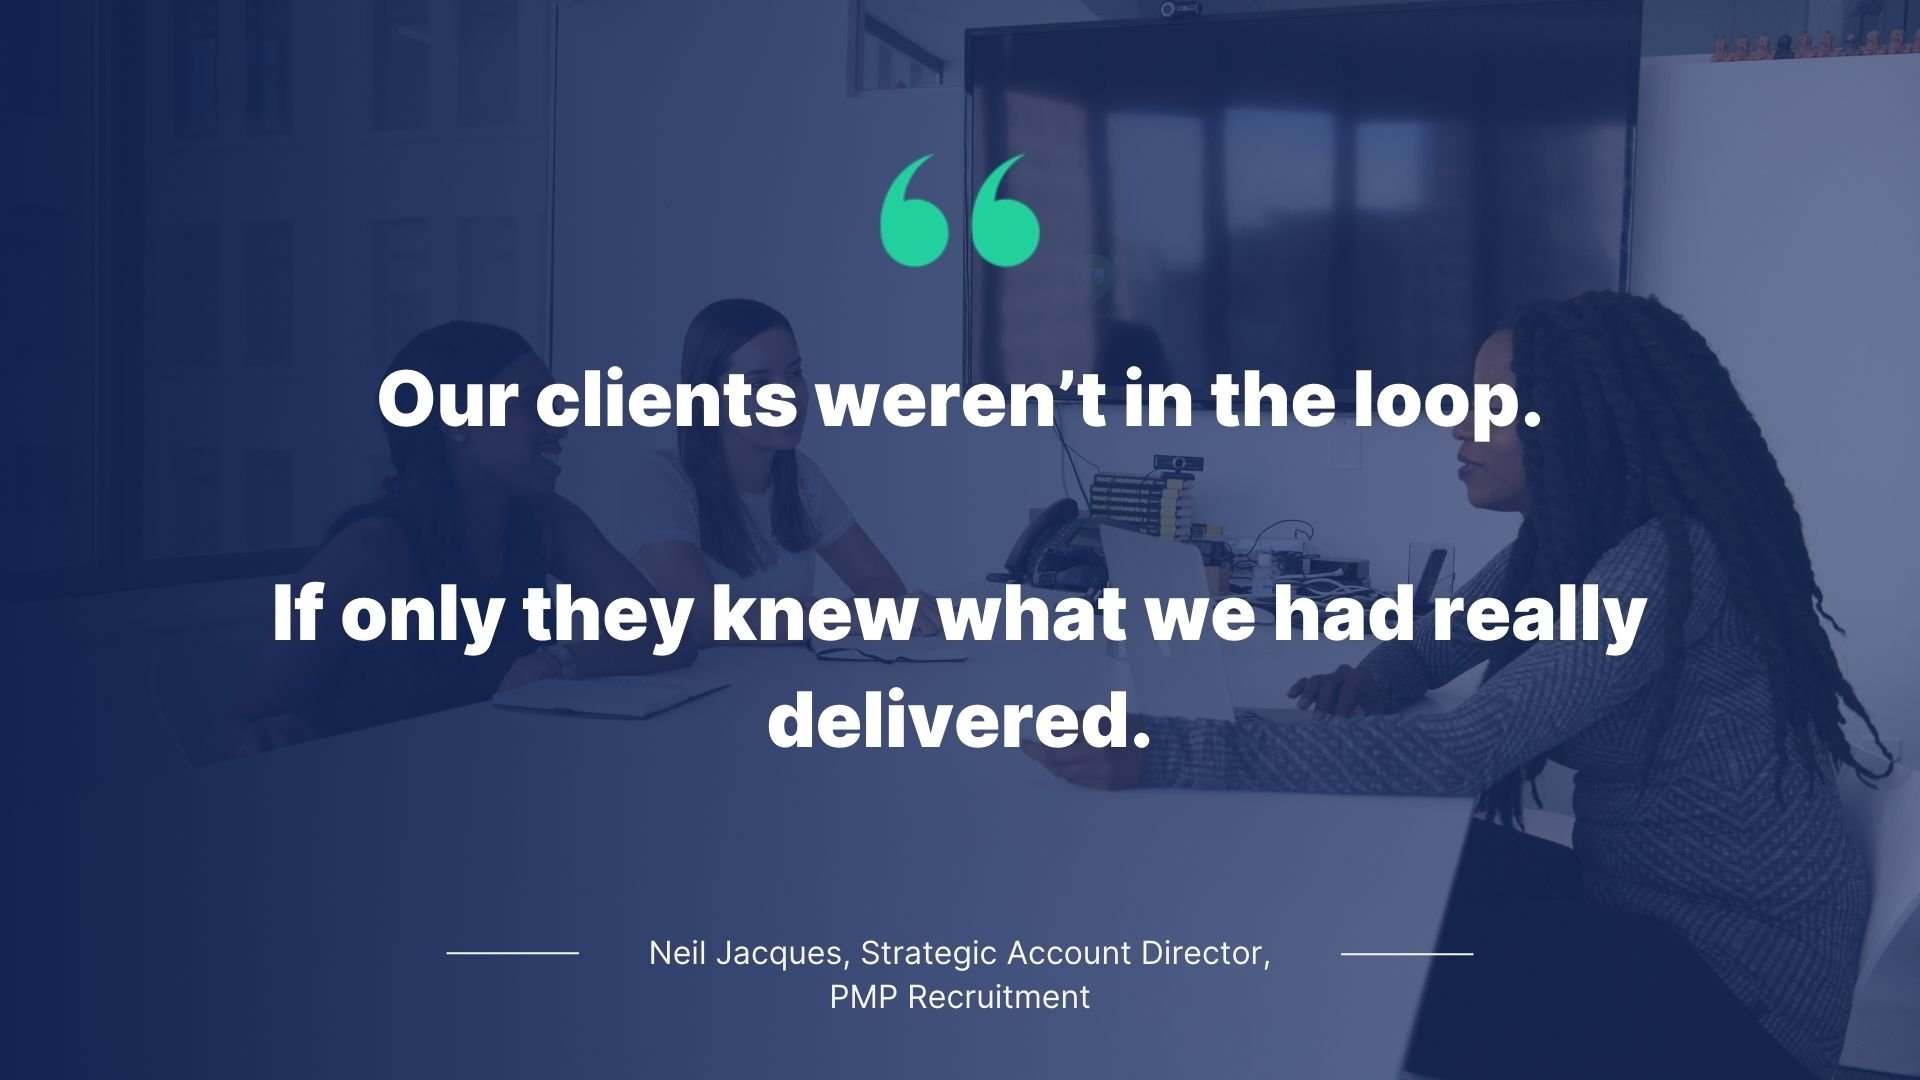 Quote y Neil Jacques, Strategic Account Director, PMP Recruitment: Our clients weren't in the loop. If only they knew what we had really delivered.